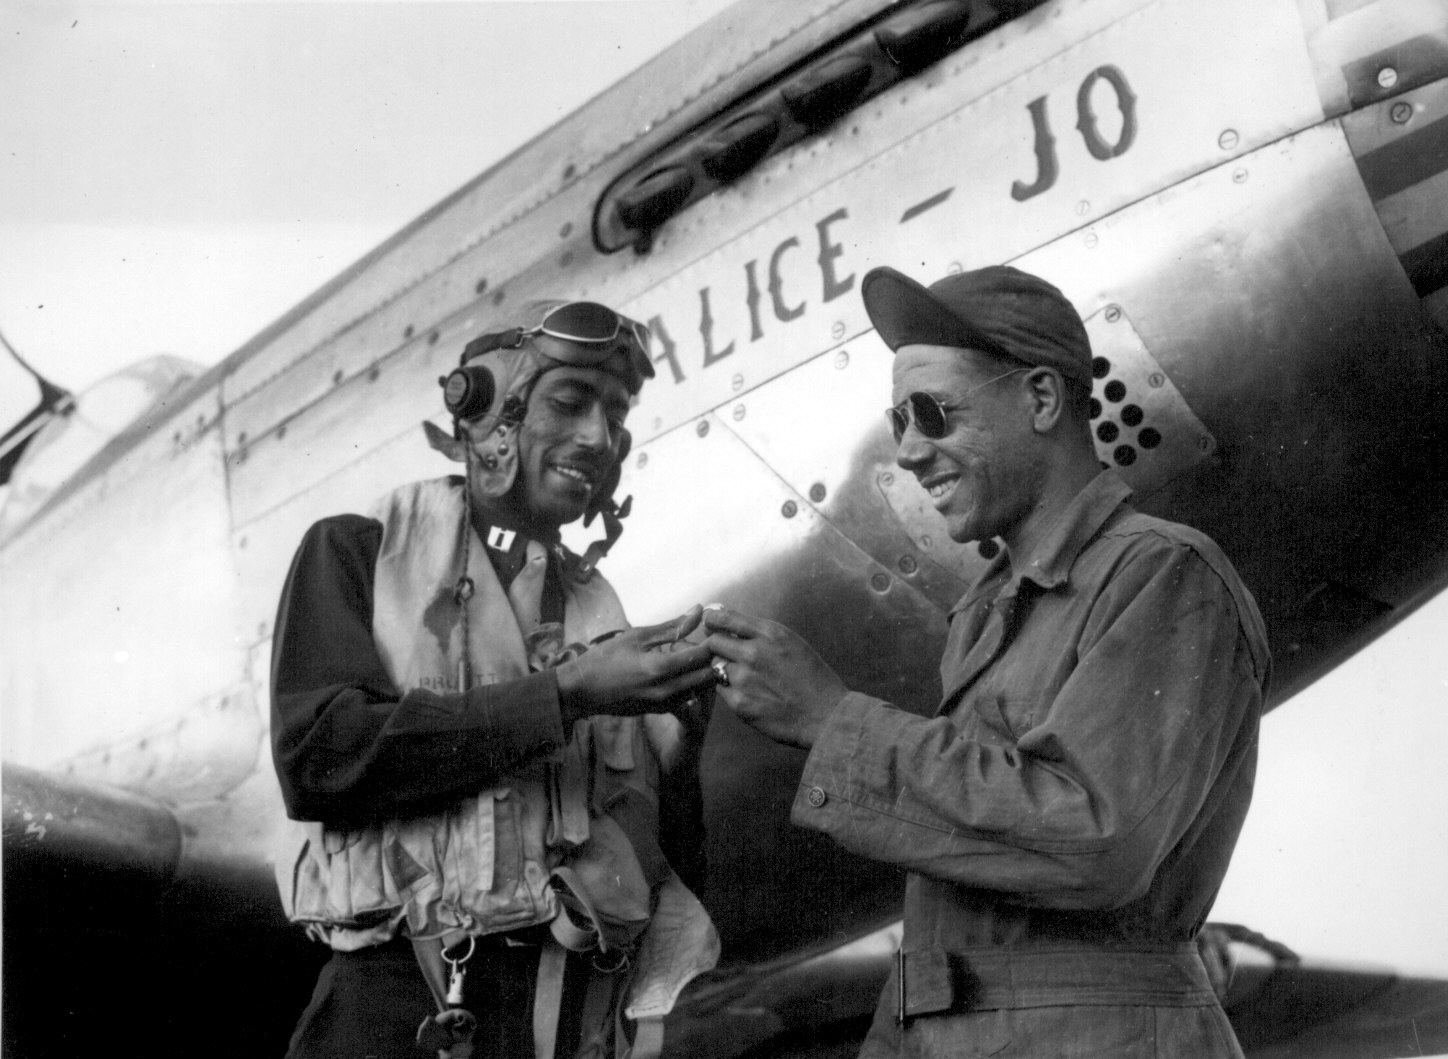 US 15th Air Force African-American pilot Captain Wendell Pruitt leaving his ring with his crew chief Staff Sergeant Samuel Jacobs before leaving on a mission in his P-51 Mustang fighter, Nov 1944